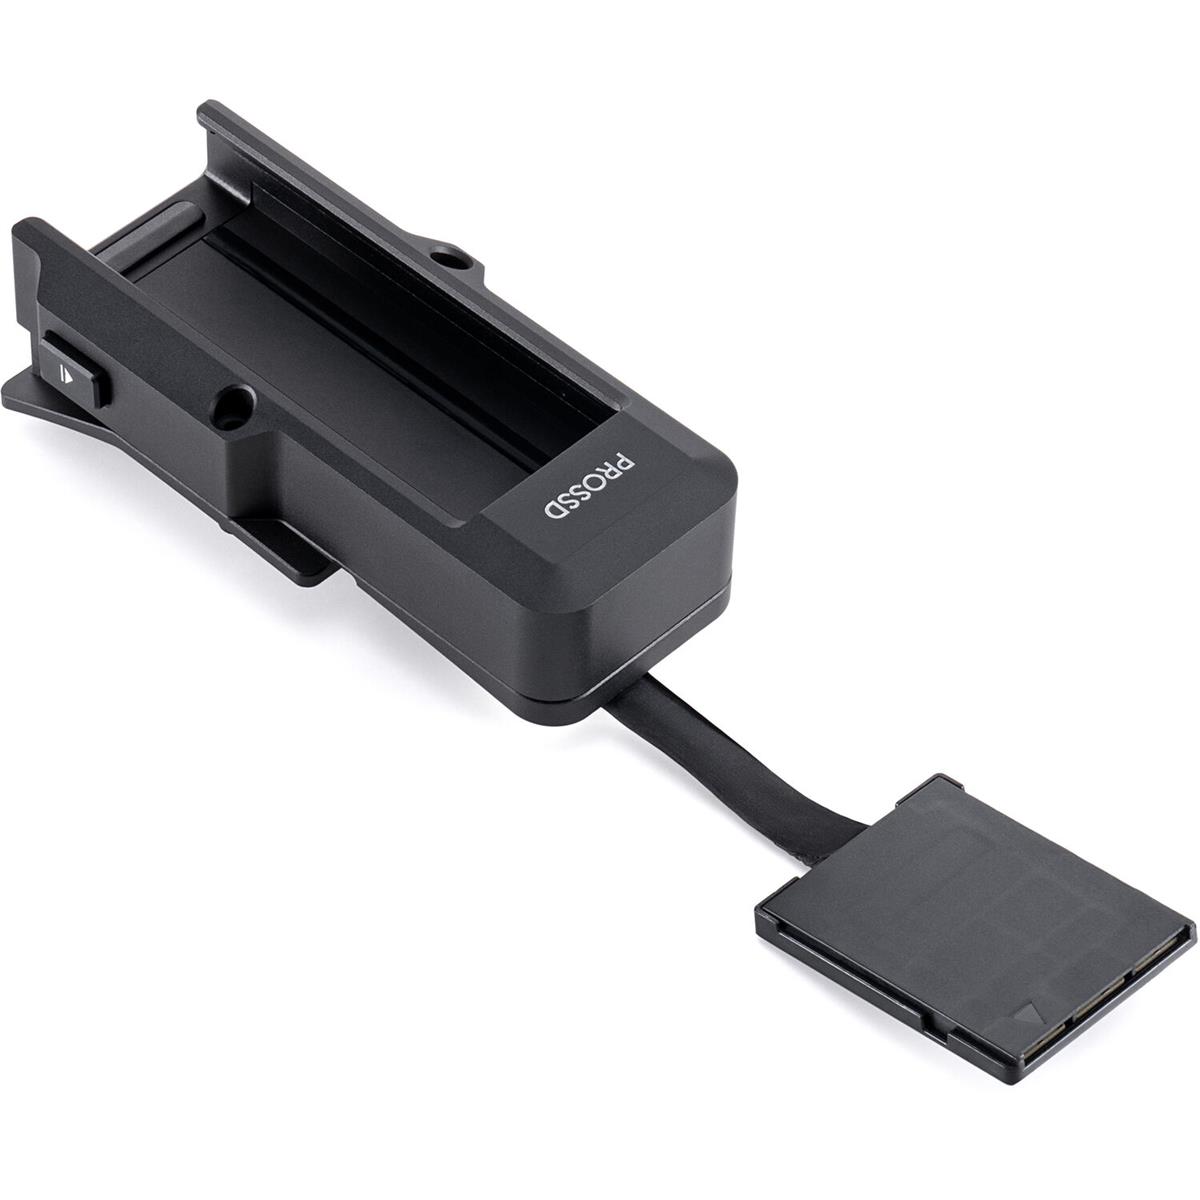 Image of DJI Mount for PROSSD 1TB SSD Drive